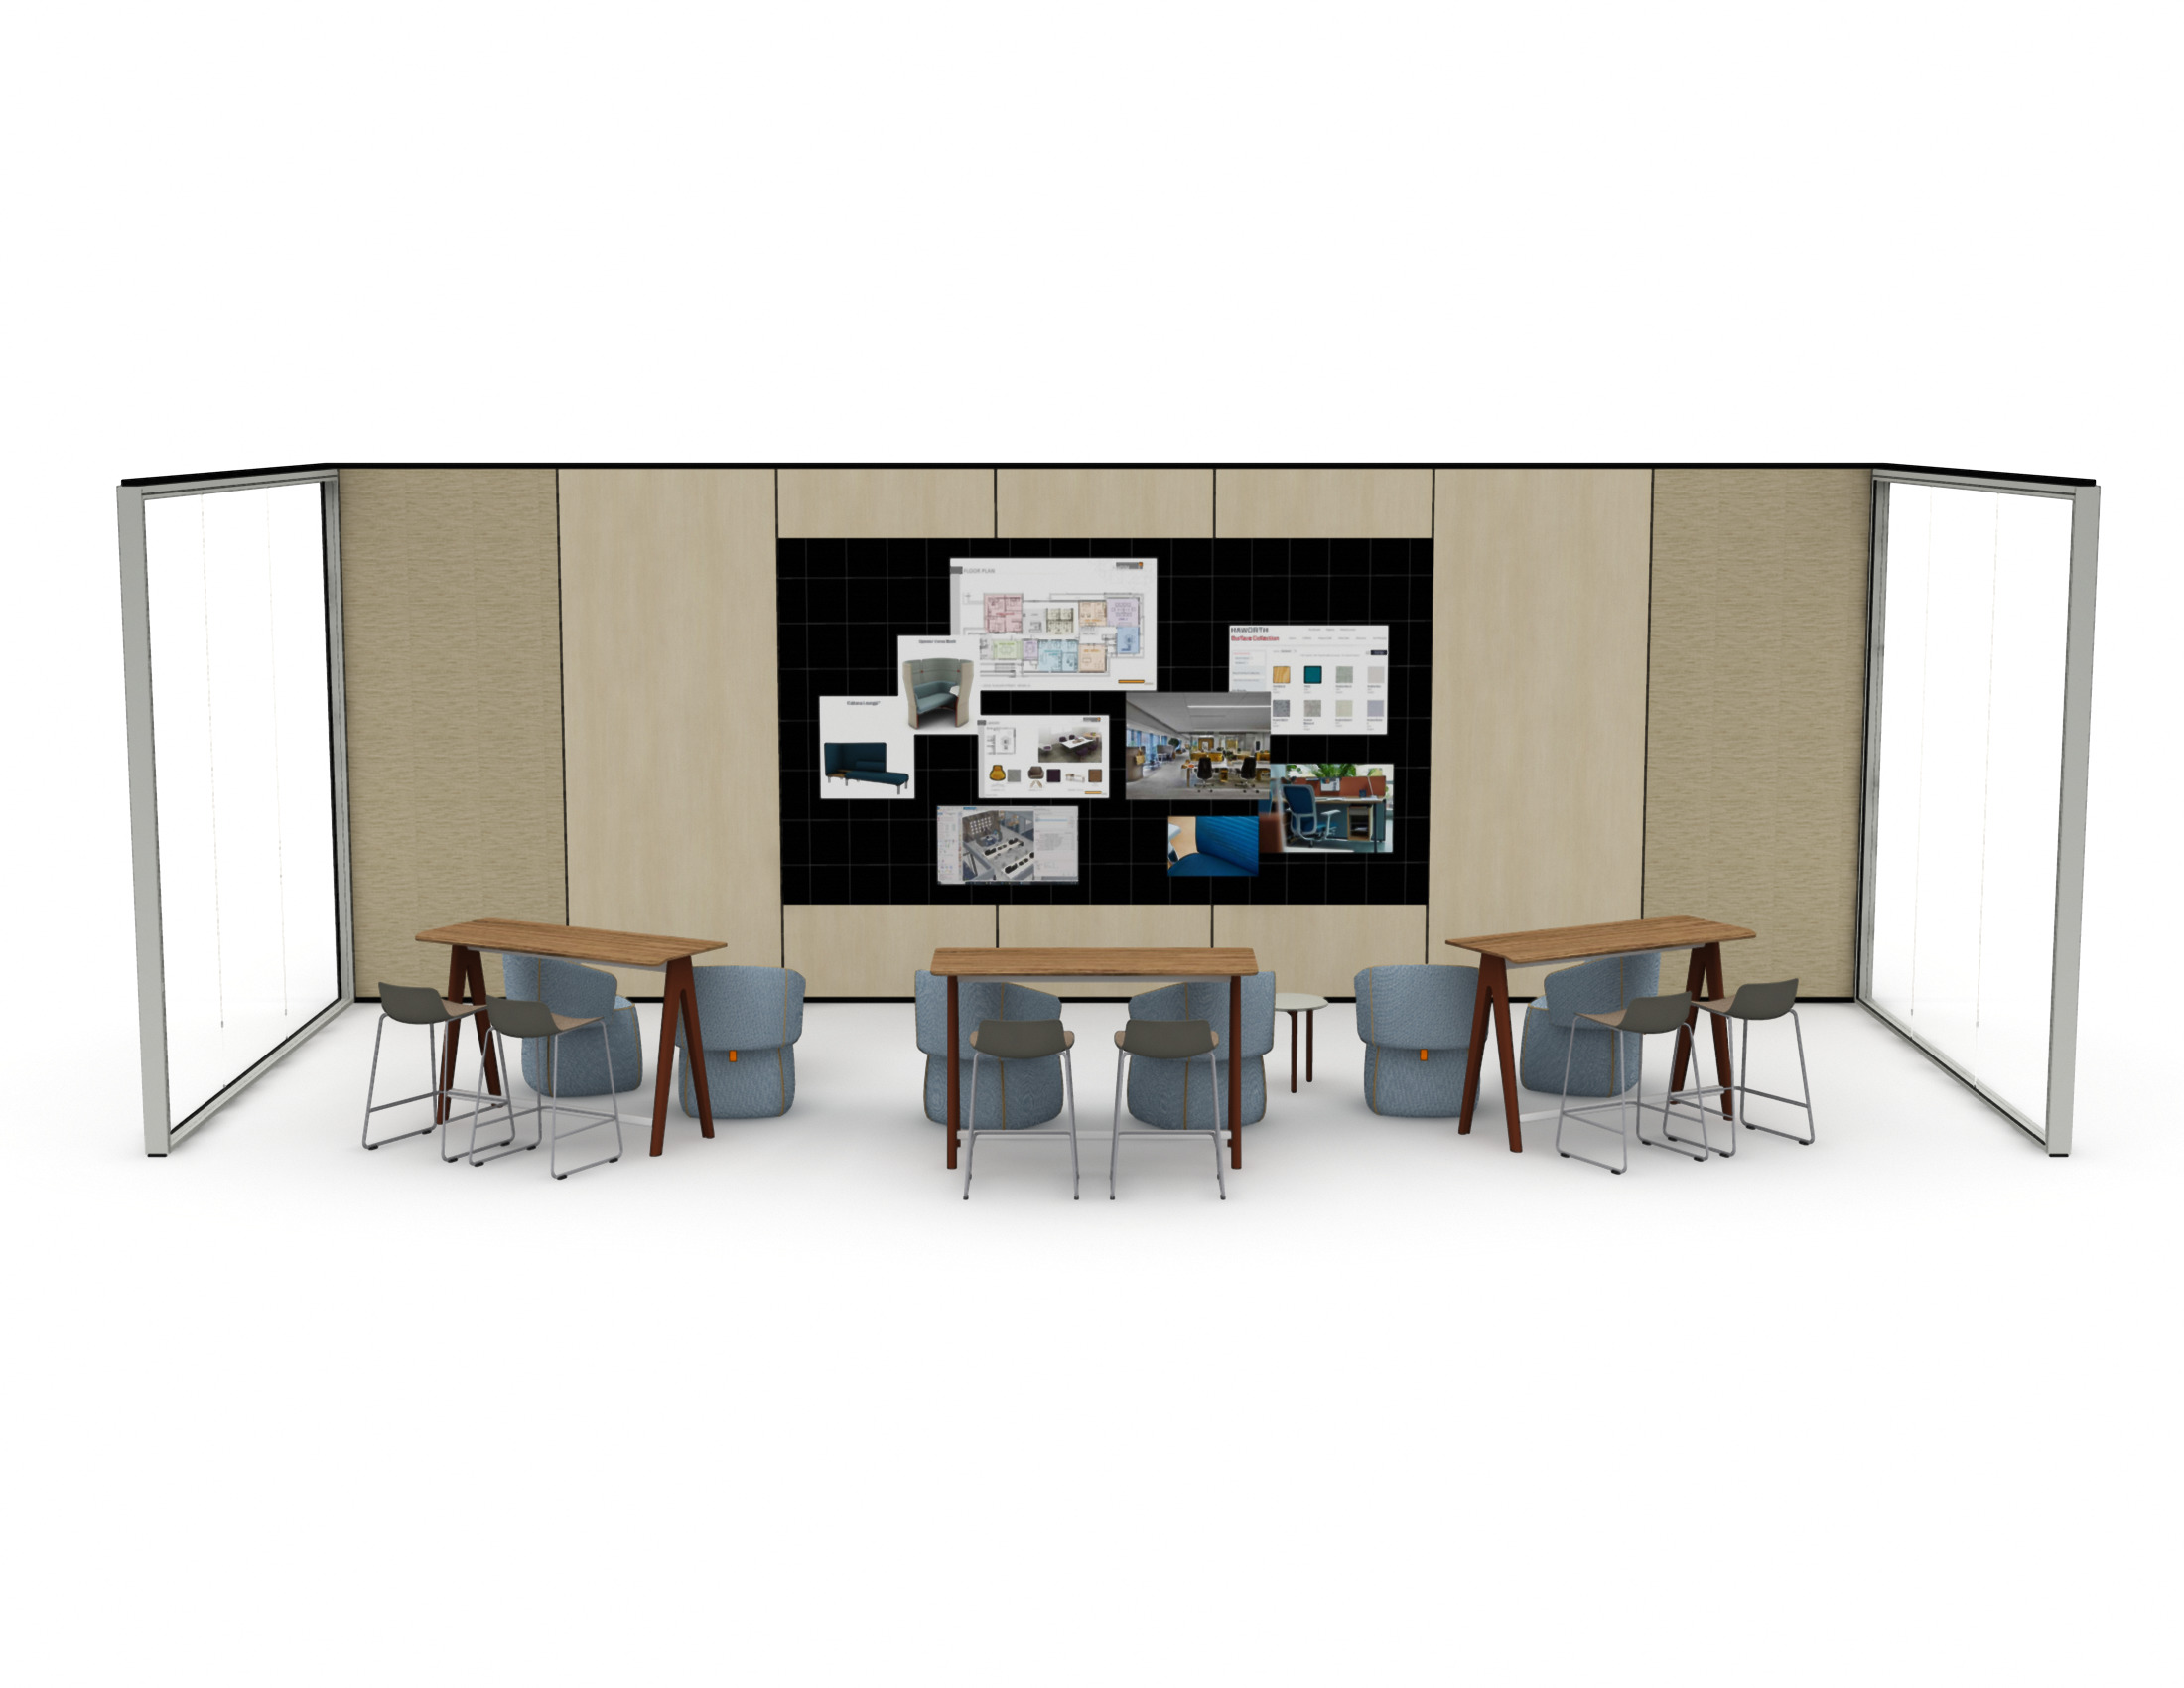 Haworth Bluescape accessory mock up in conference room with tables looking at work space